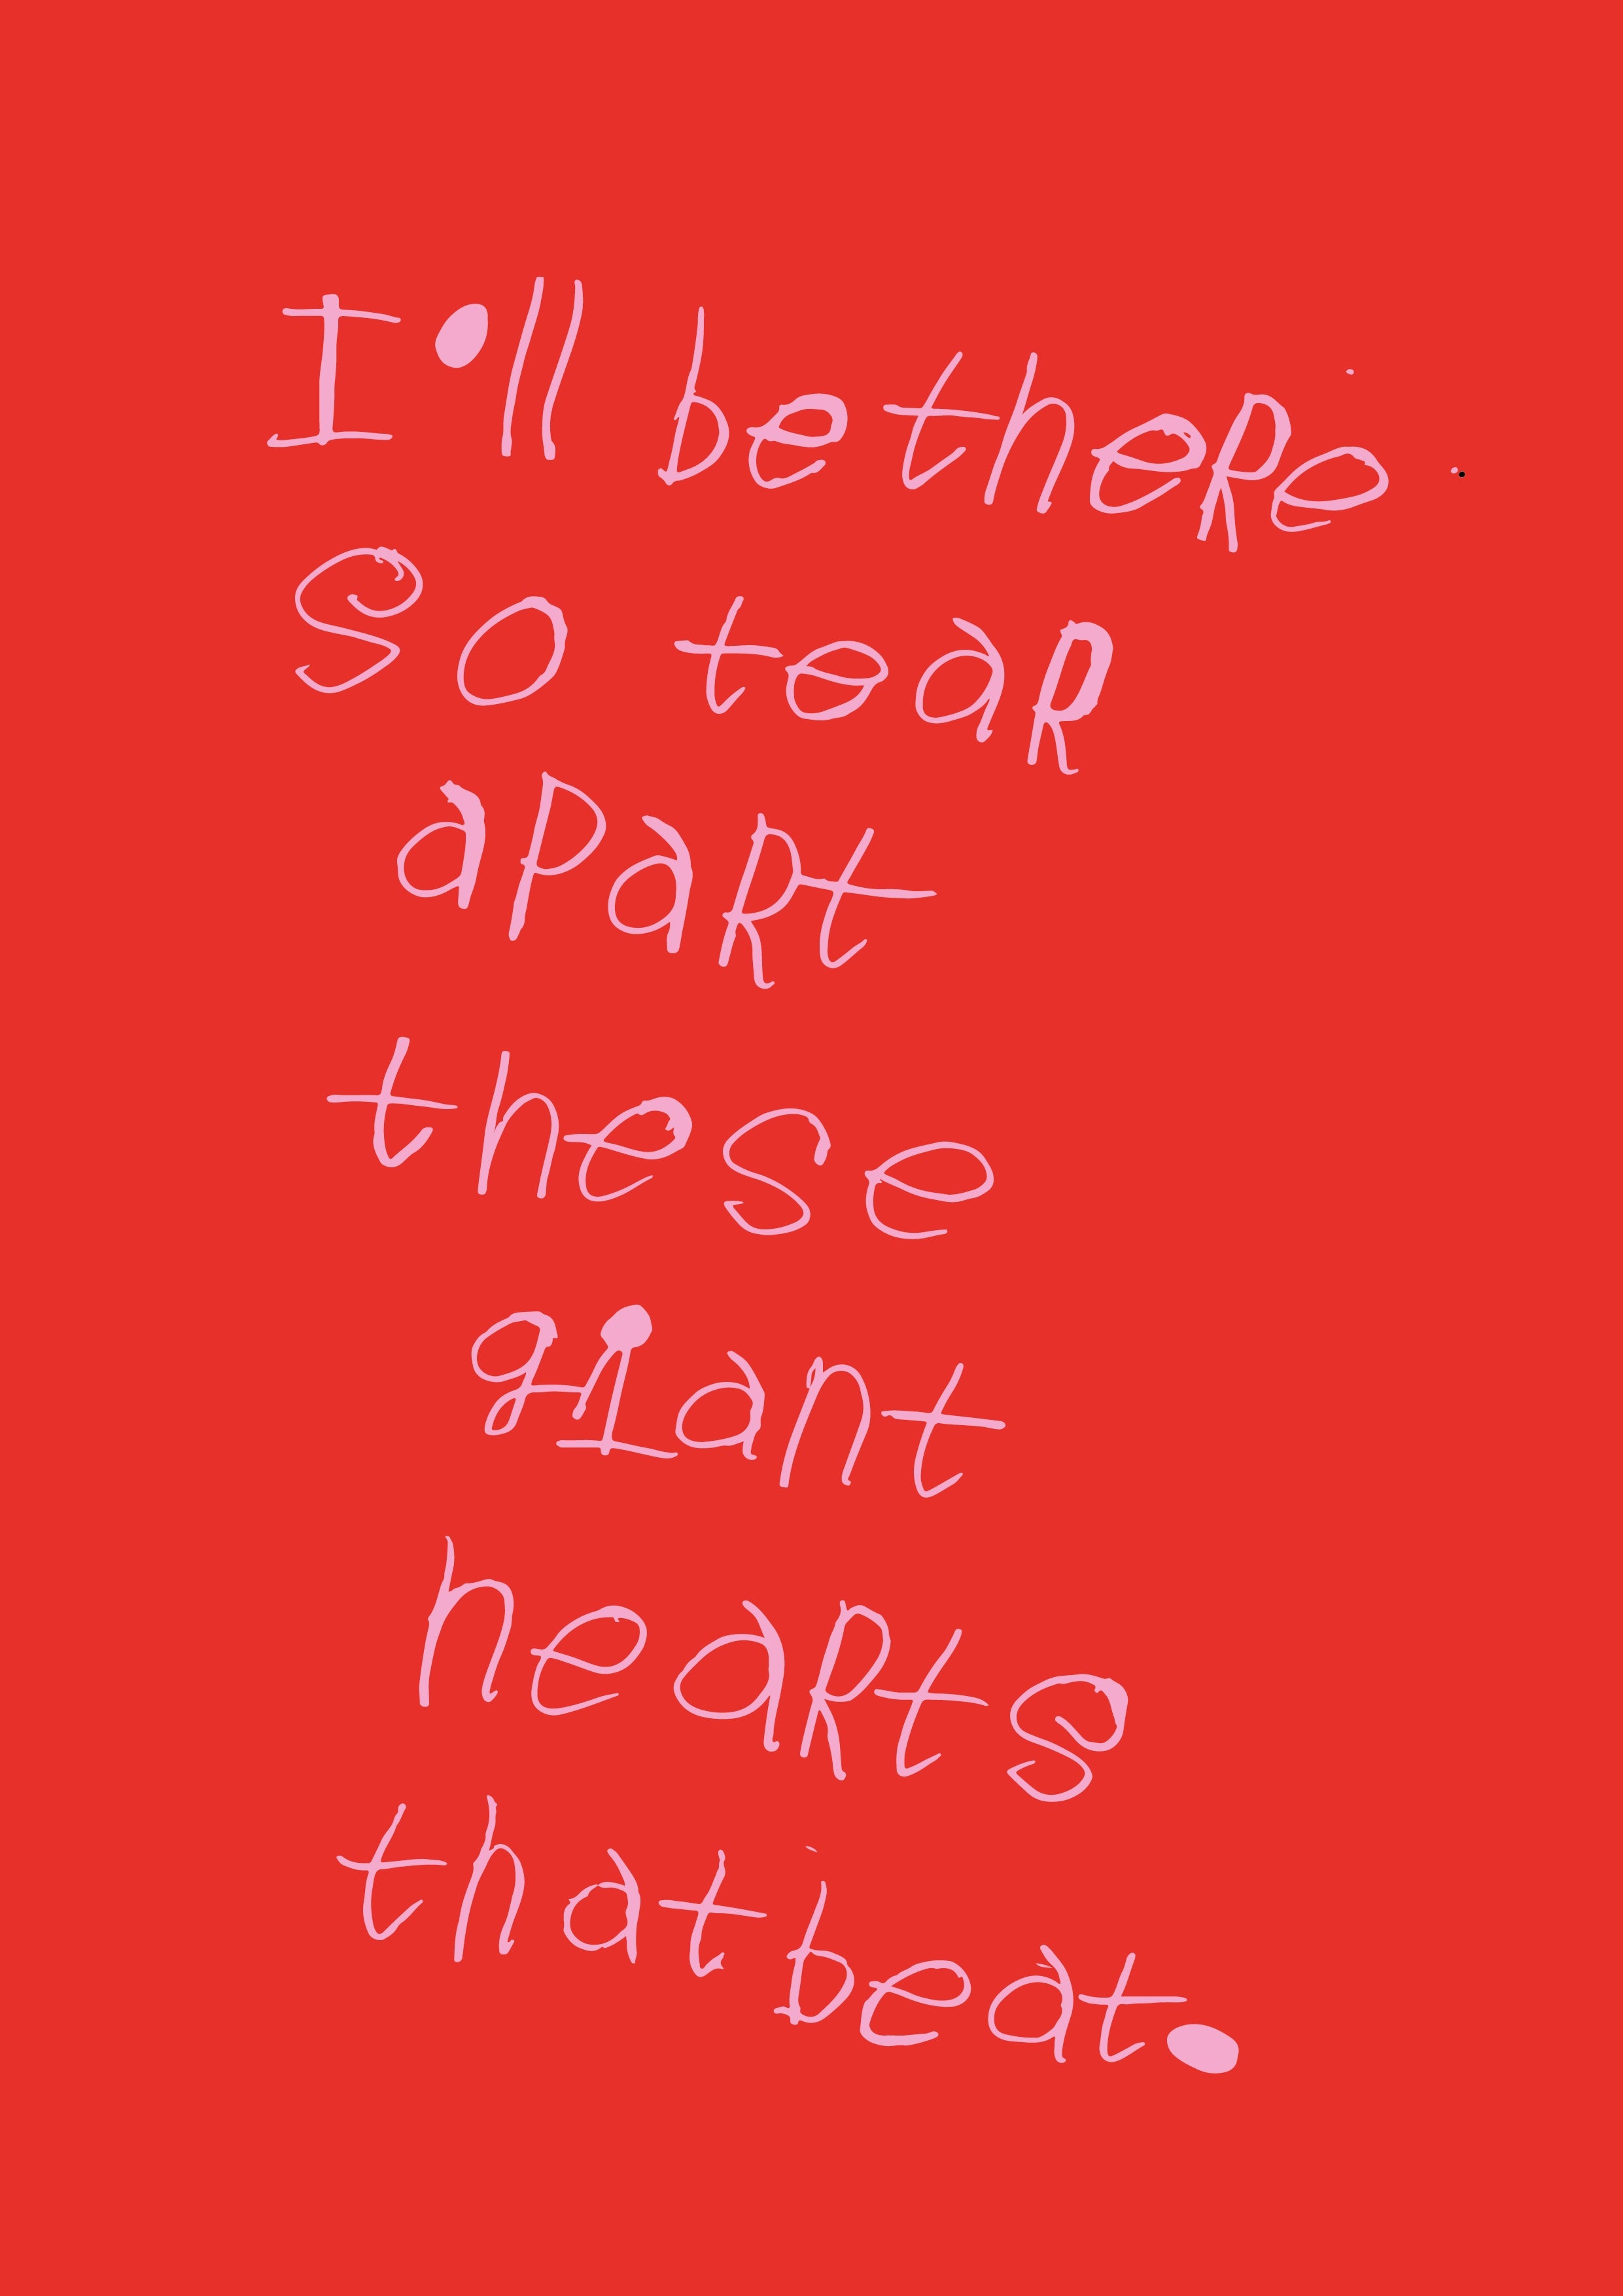 'I'll be there so tear apart these giant hearts that beat.' by Notes by Piper